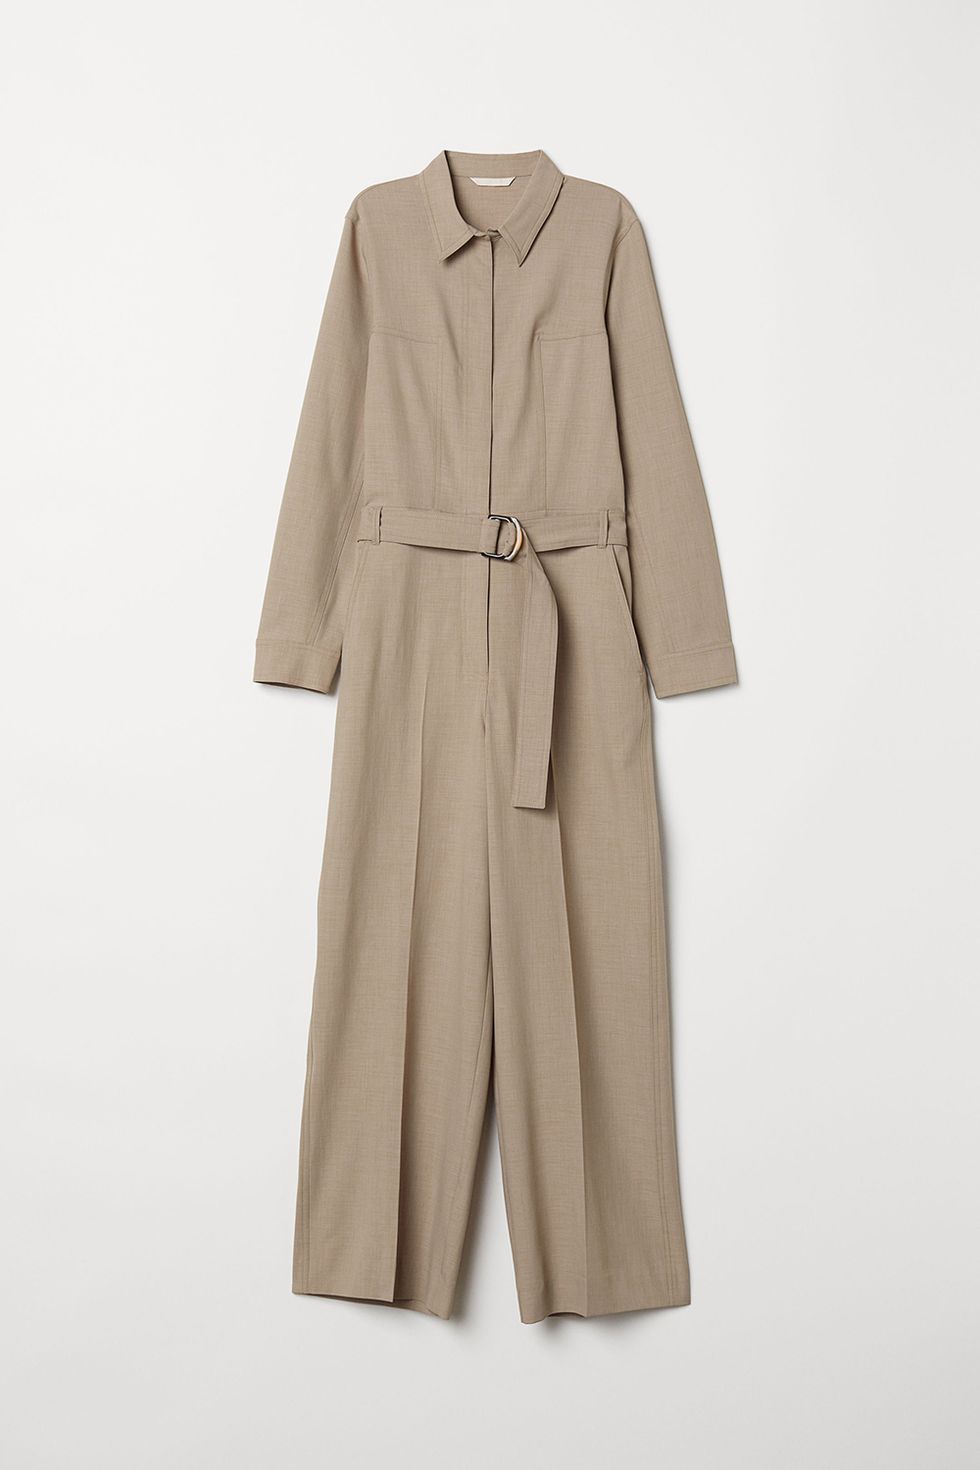 Clothing, Trench coat, Coat, Outerwear, Overcoat, Sleeve, Beige, Robe, Collar, Duster, 